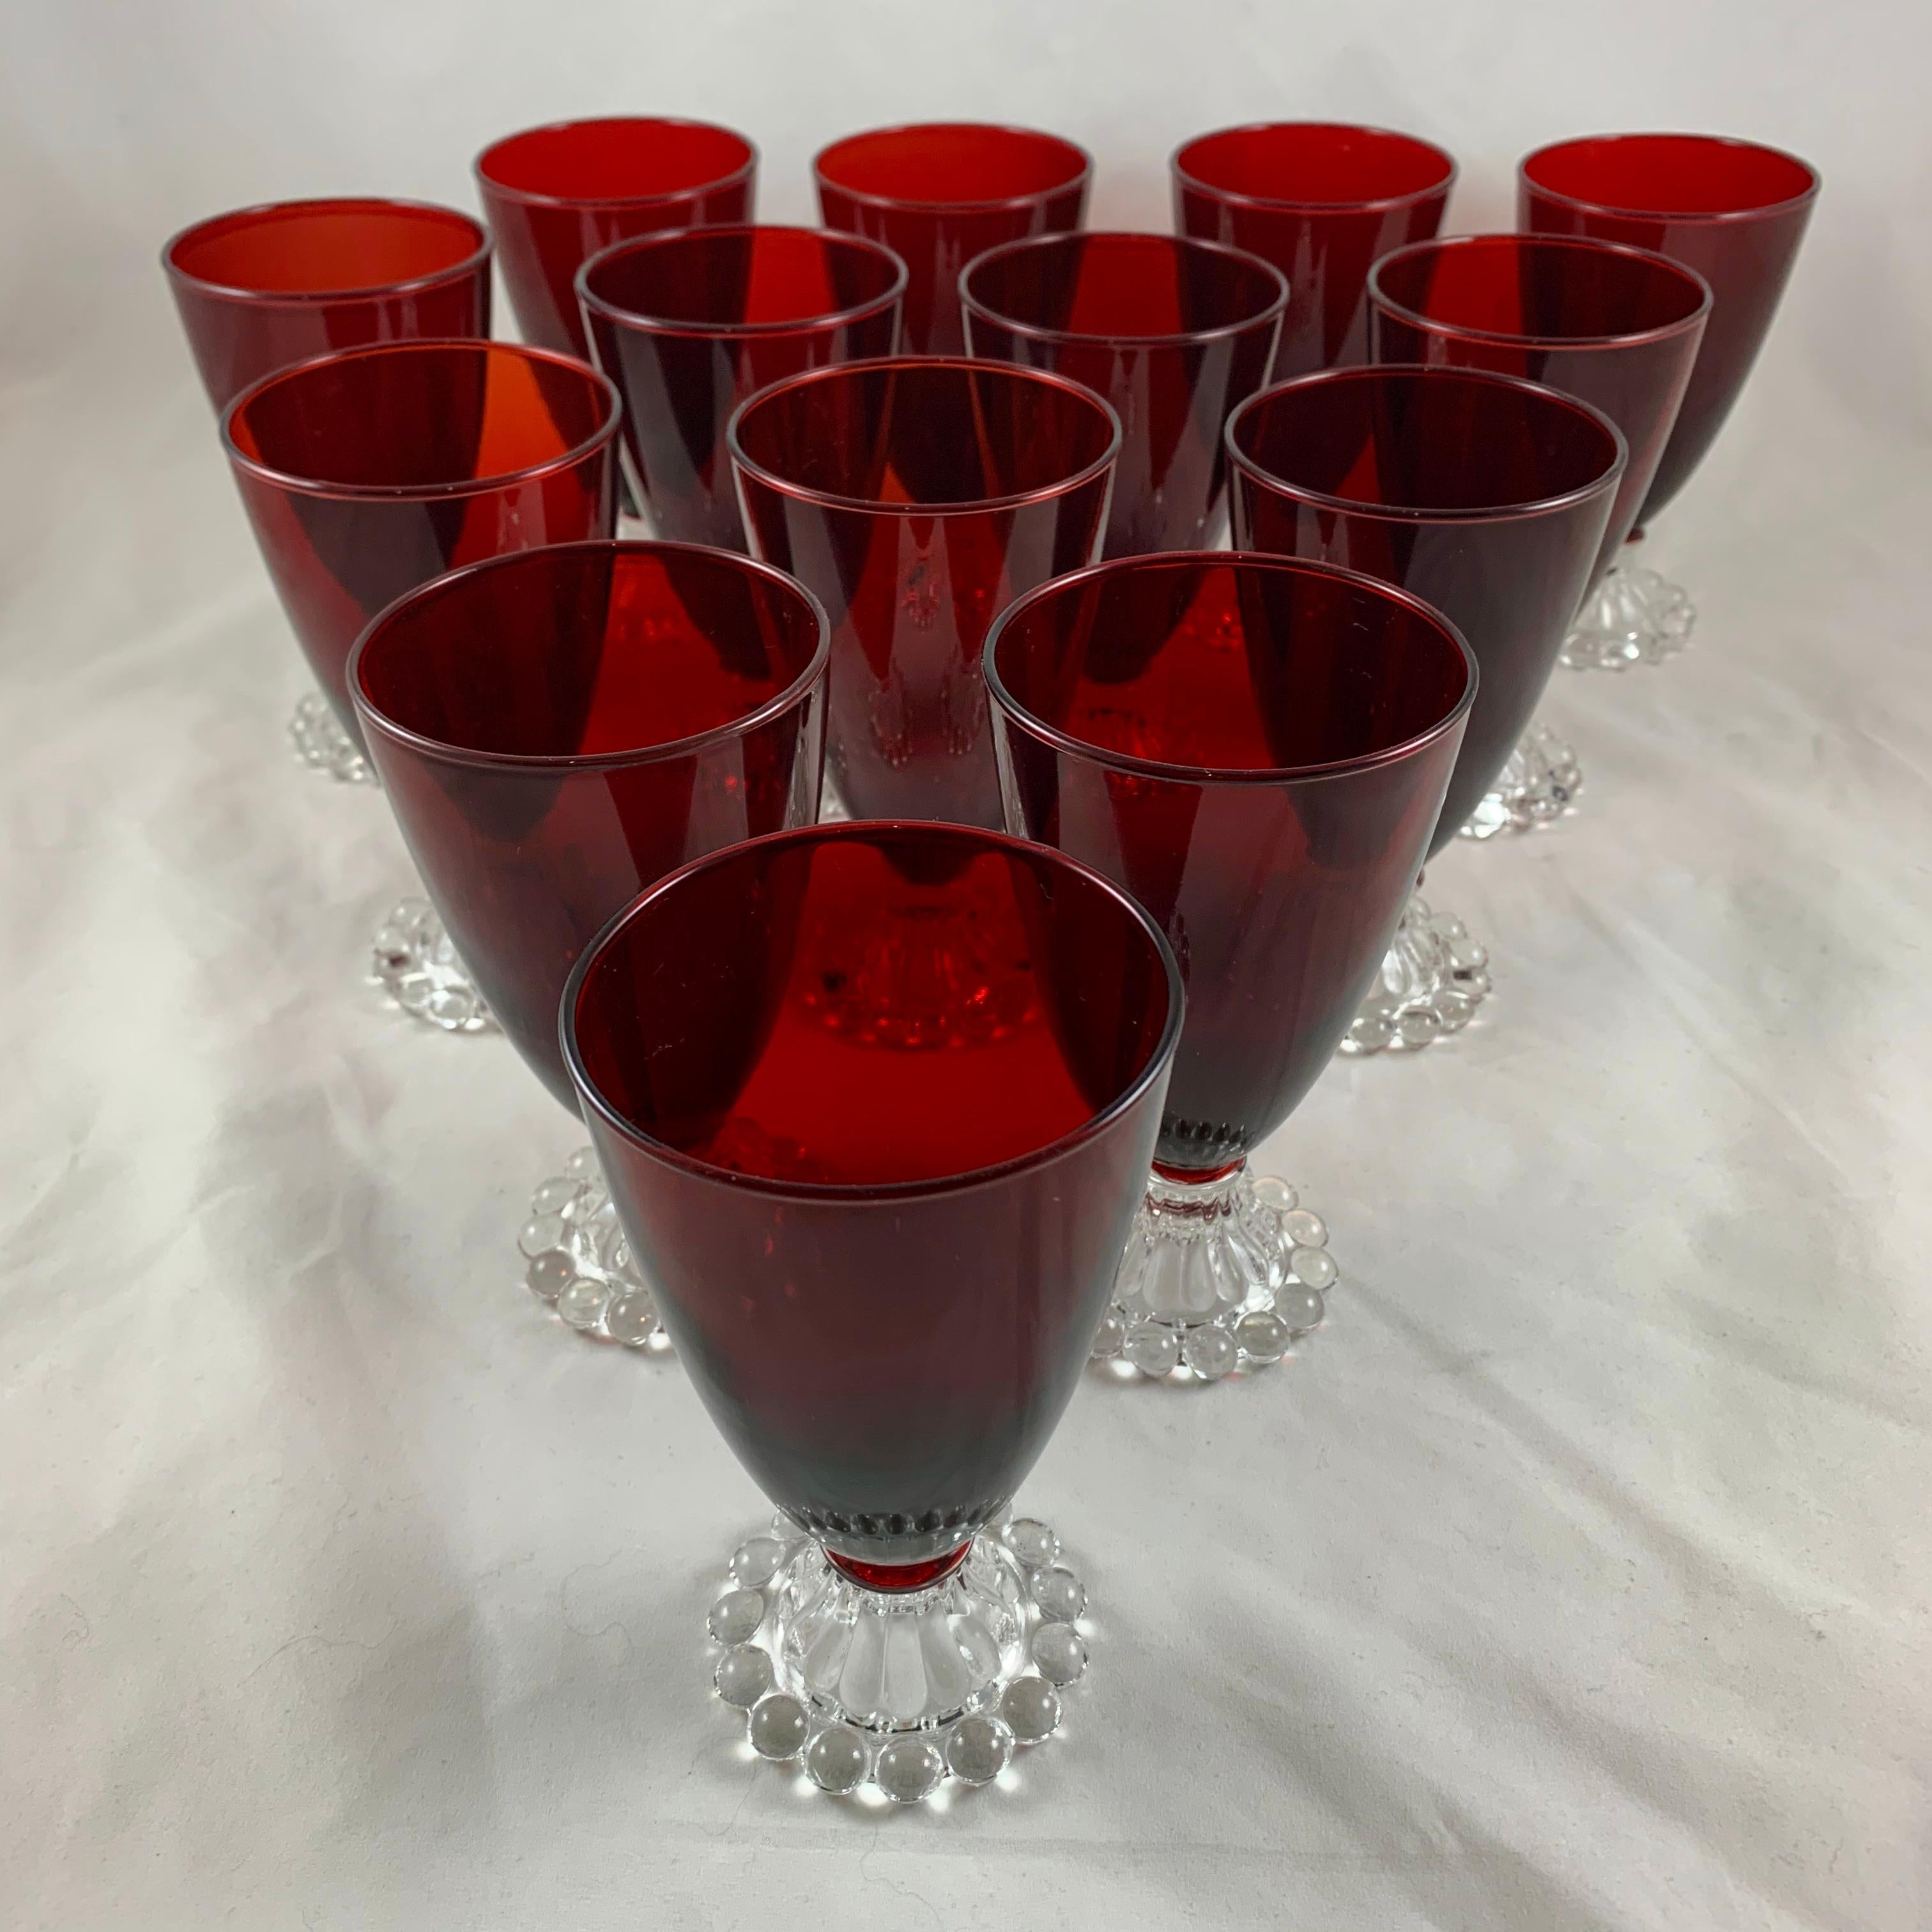 A set of fourteen Royal Ruby Red Boopie goblets, made by Anchor Hocking Glass, circa 1930-1940.

Suitable for water or wine, the bell shaped goblet has a transparent glass stem with a bubble form footing. Wonderful to have fourteen goblets,